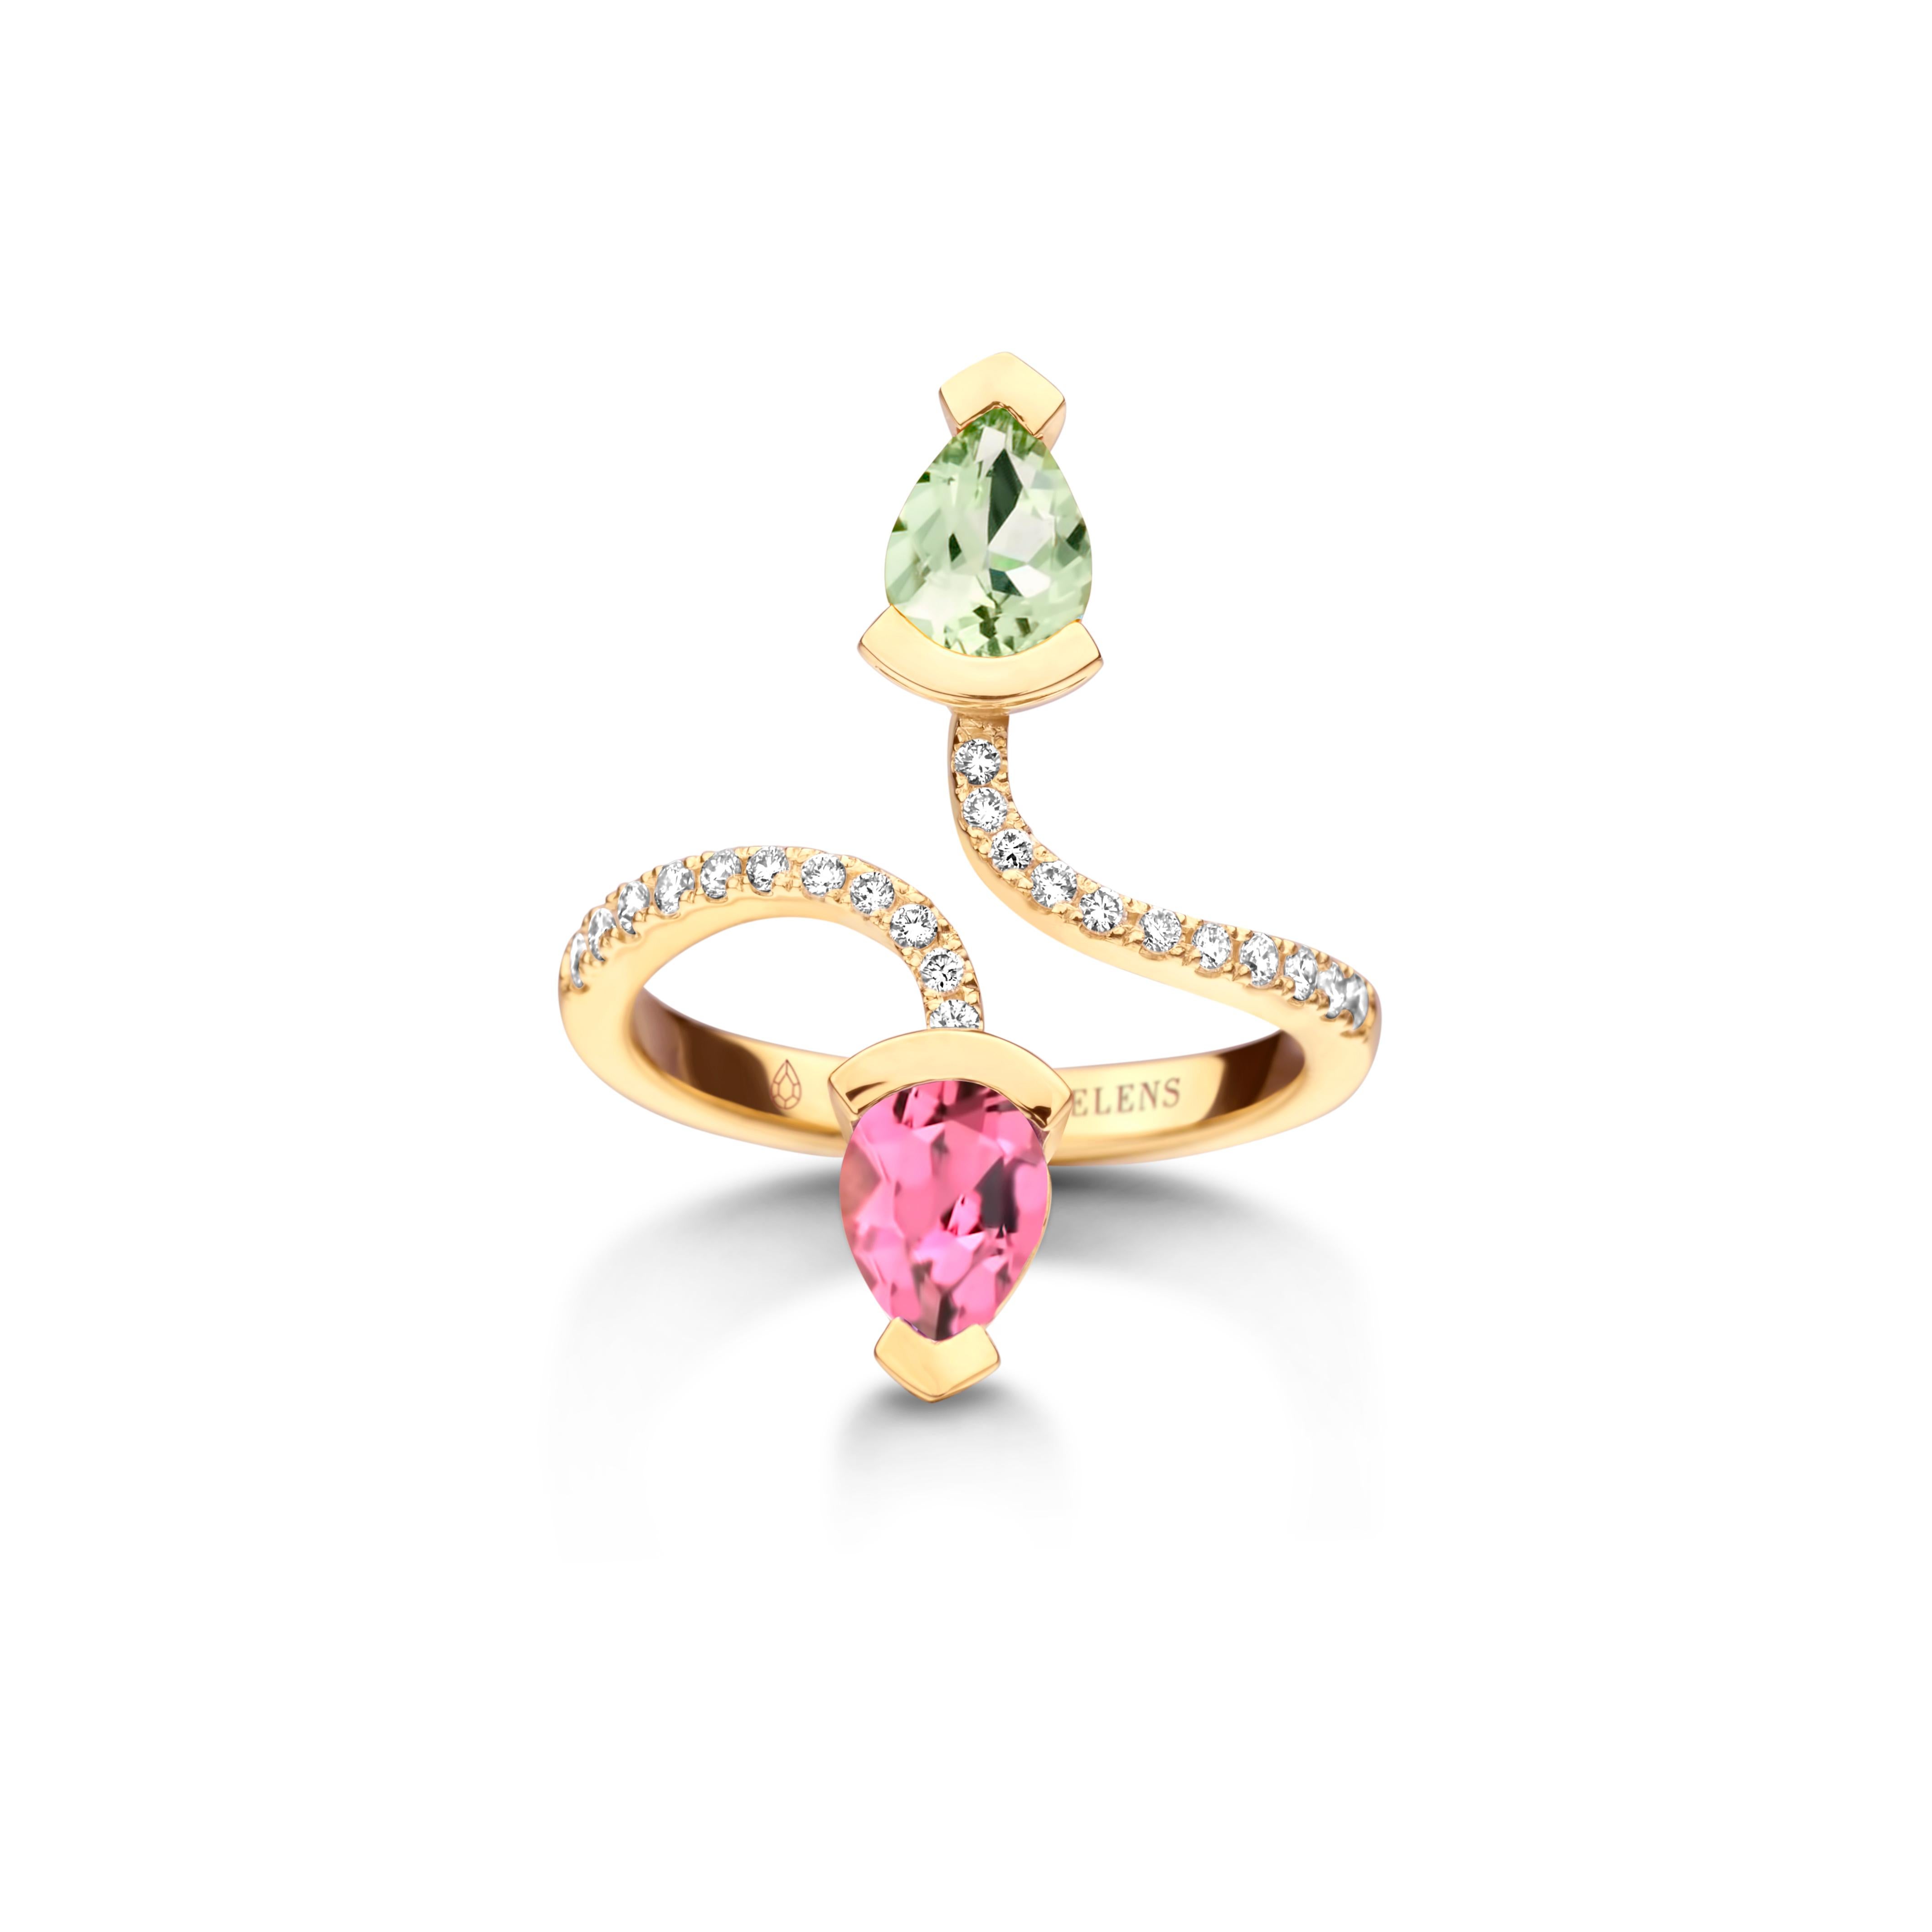 Adeline Duo ring in 18Kt white gold 5g set with a pear-shaped green beryl 0,70 Ct, a pear-shaped pink tourmaline 0,70 Ct and 0,19 Ct of white brilliant cut diamonds - VS F quality. Celine Roelens, a goldsmith and gemologist, is specialized in